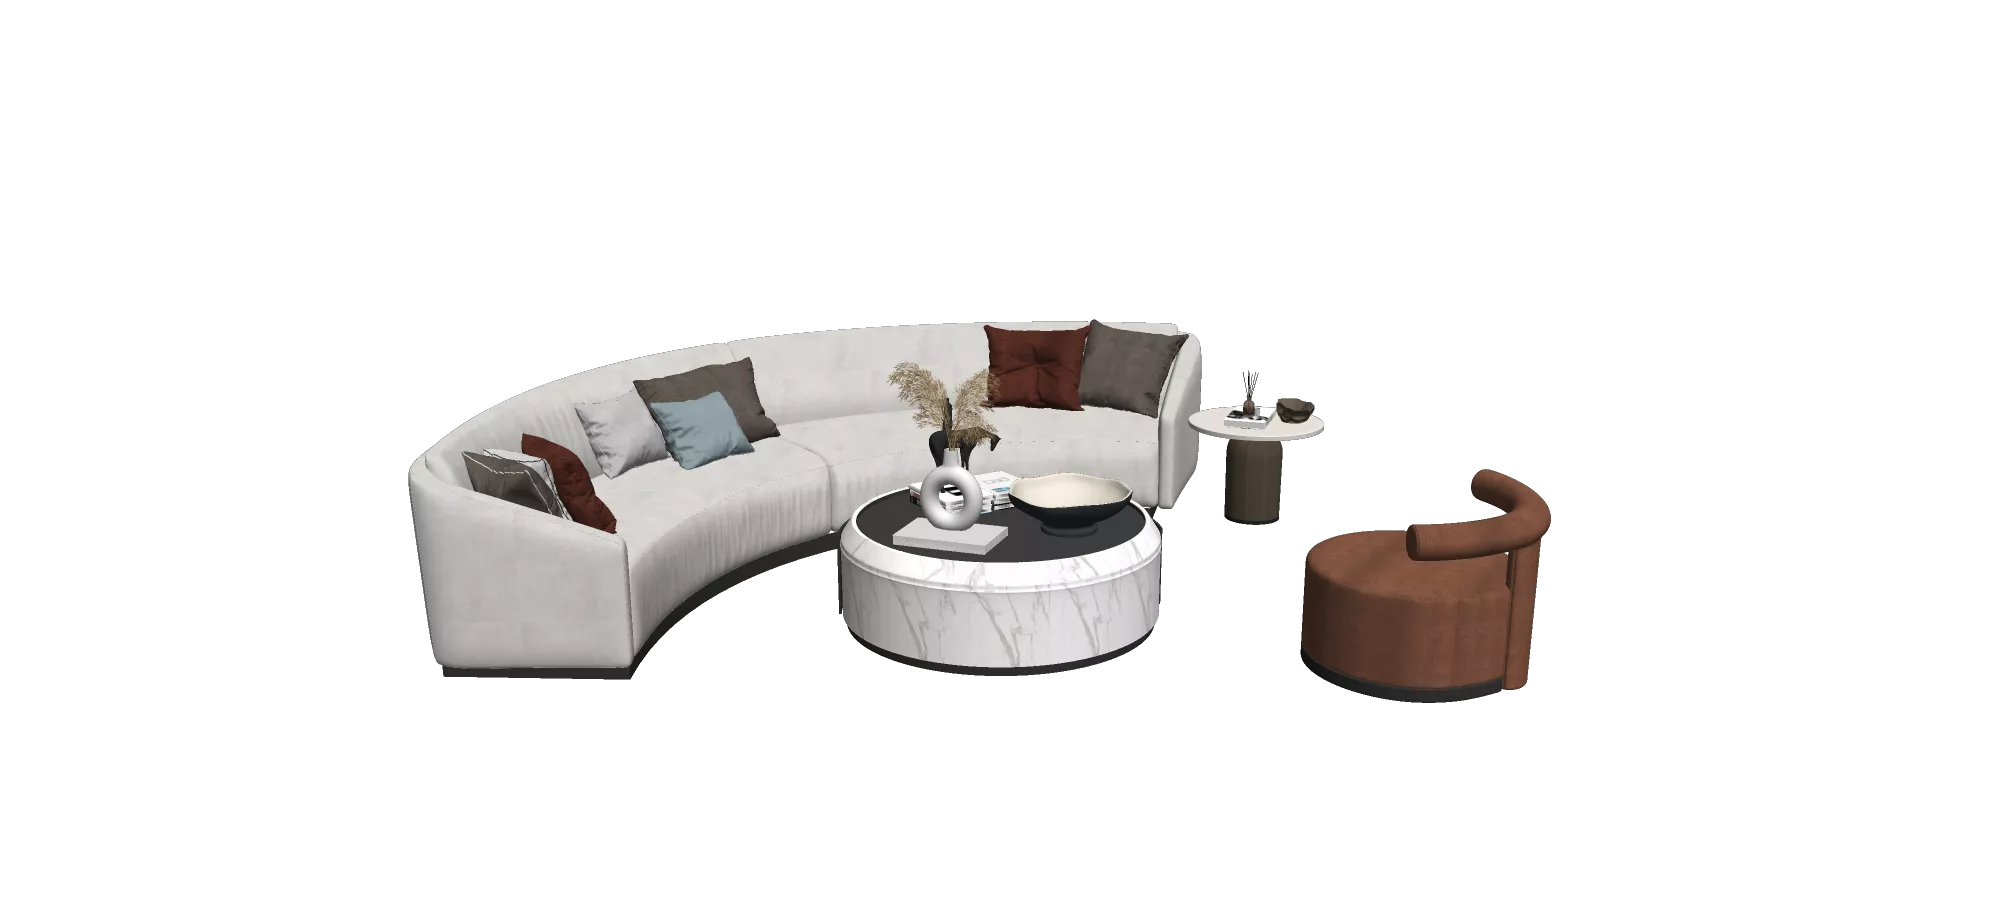 MODERN SOFA - SKETCHUP 3D MODEL - VRAY OR ENSCAPE - ID13054